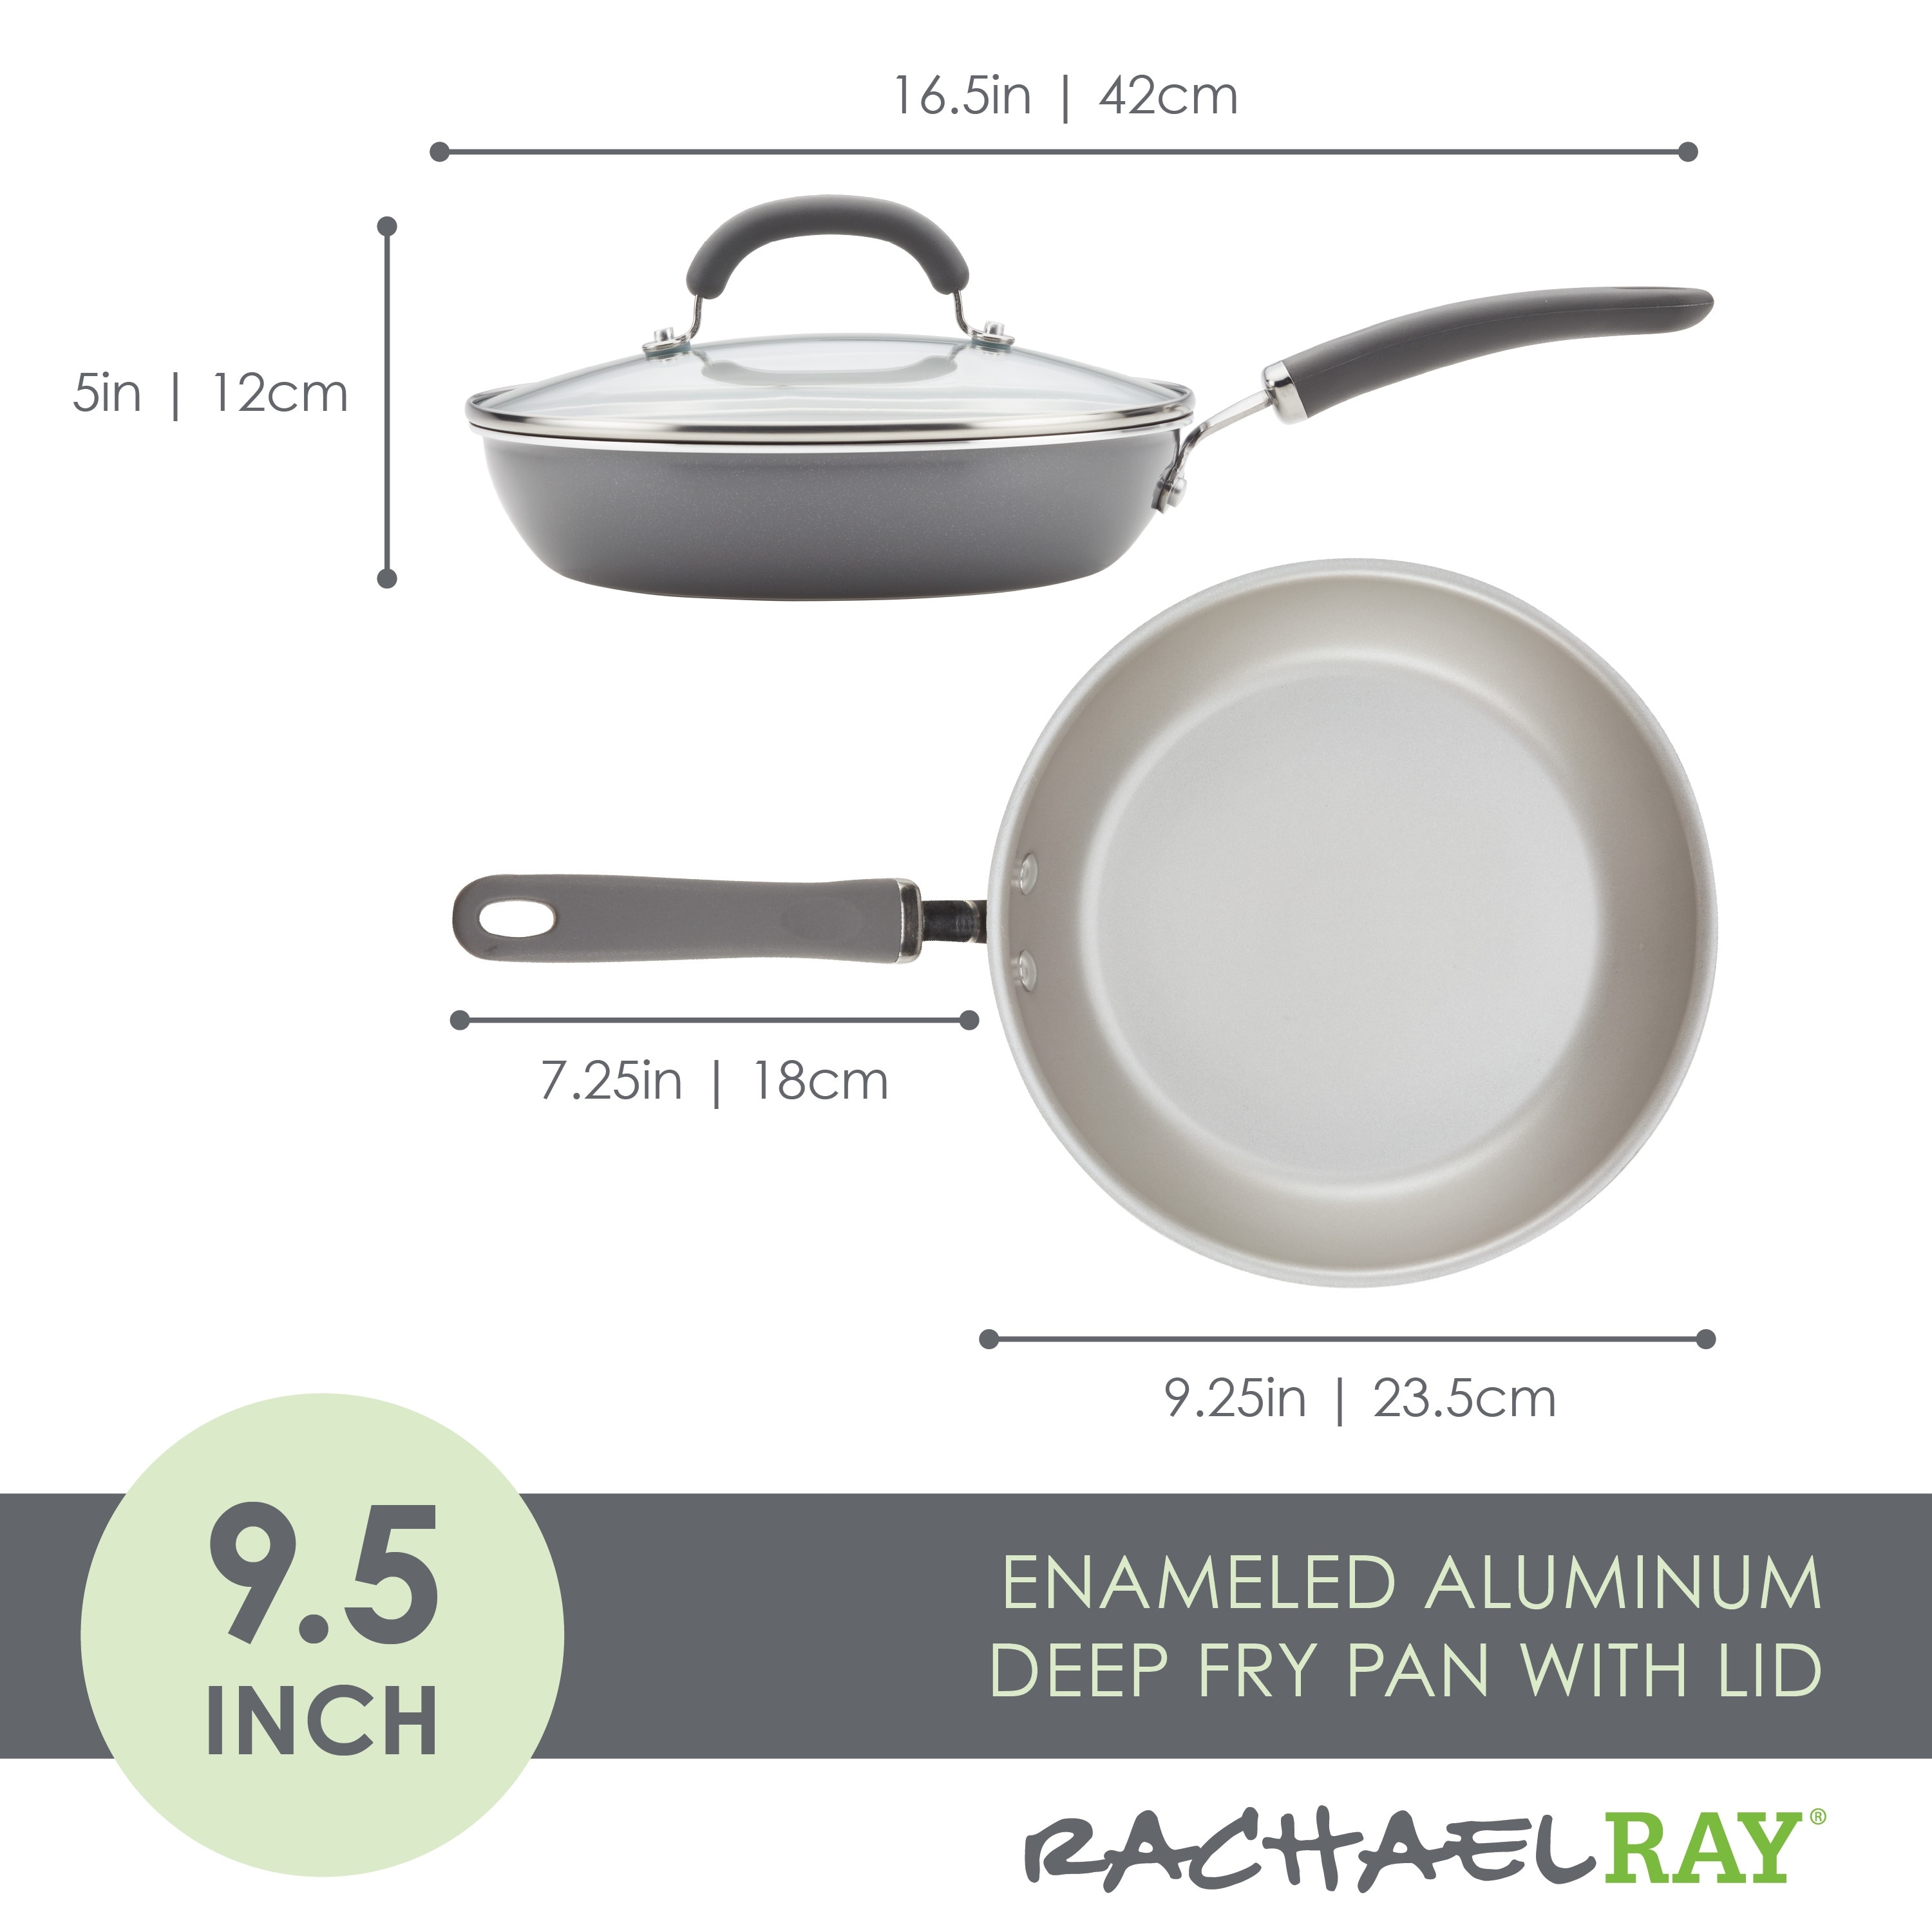 https://ak1.ostkcdn.com/images/products/is/images/direct/5054da3dff96f9b27ed7bf457d9875e854d45455/Rachael-Ray-Create-Delicious-Aluminum-Nonstick-Induction-Deep-Frying-Pan-with-Lid%2C-9.5-Inch%2C-Red-Shimmer.jpg